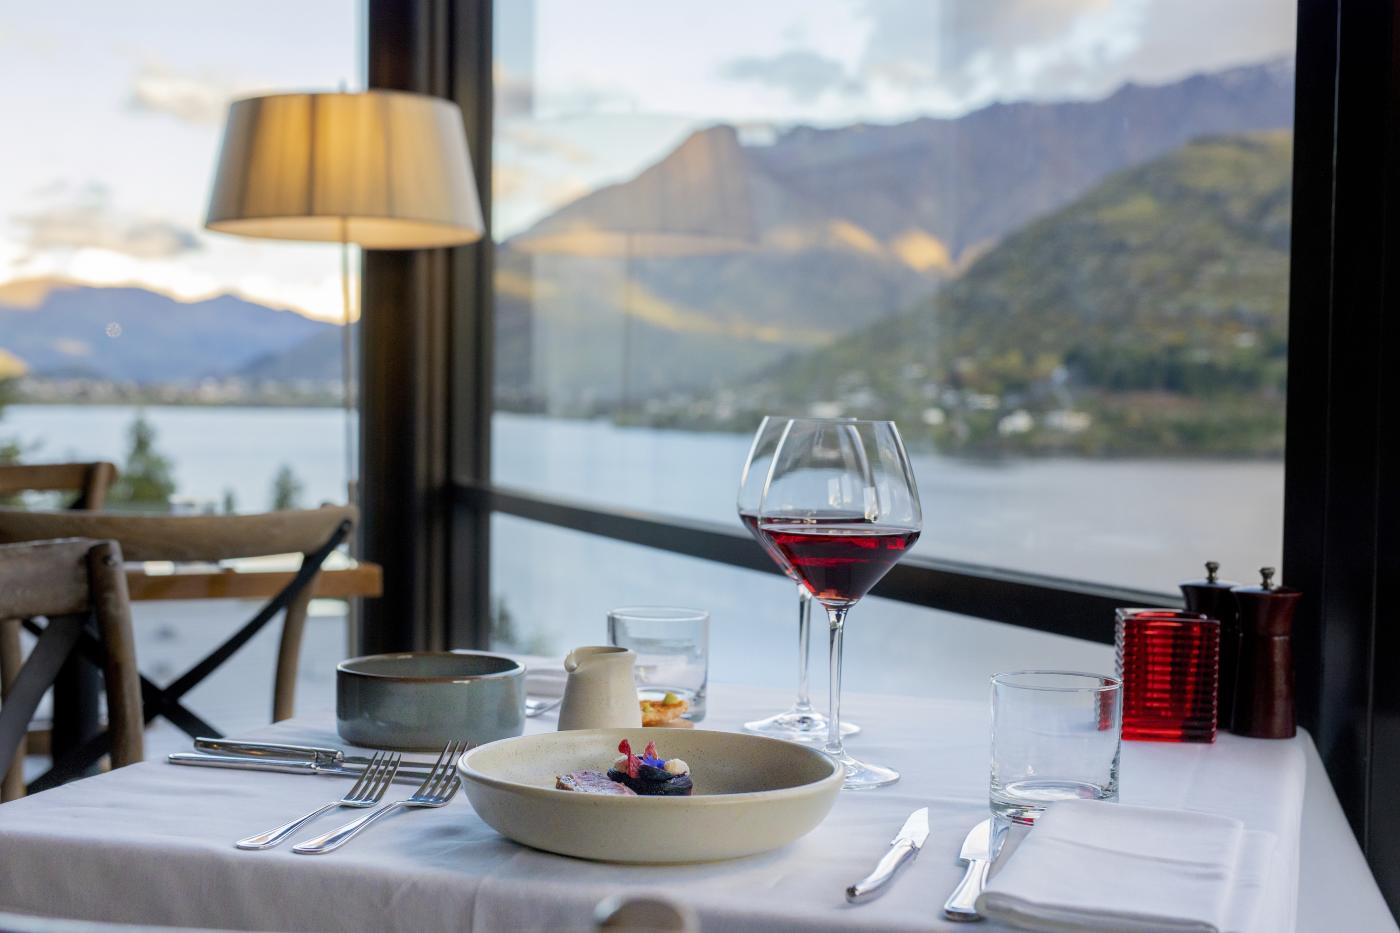 Red wine and food with view of the Remarkables mountains in the background